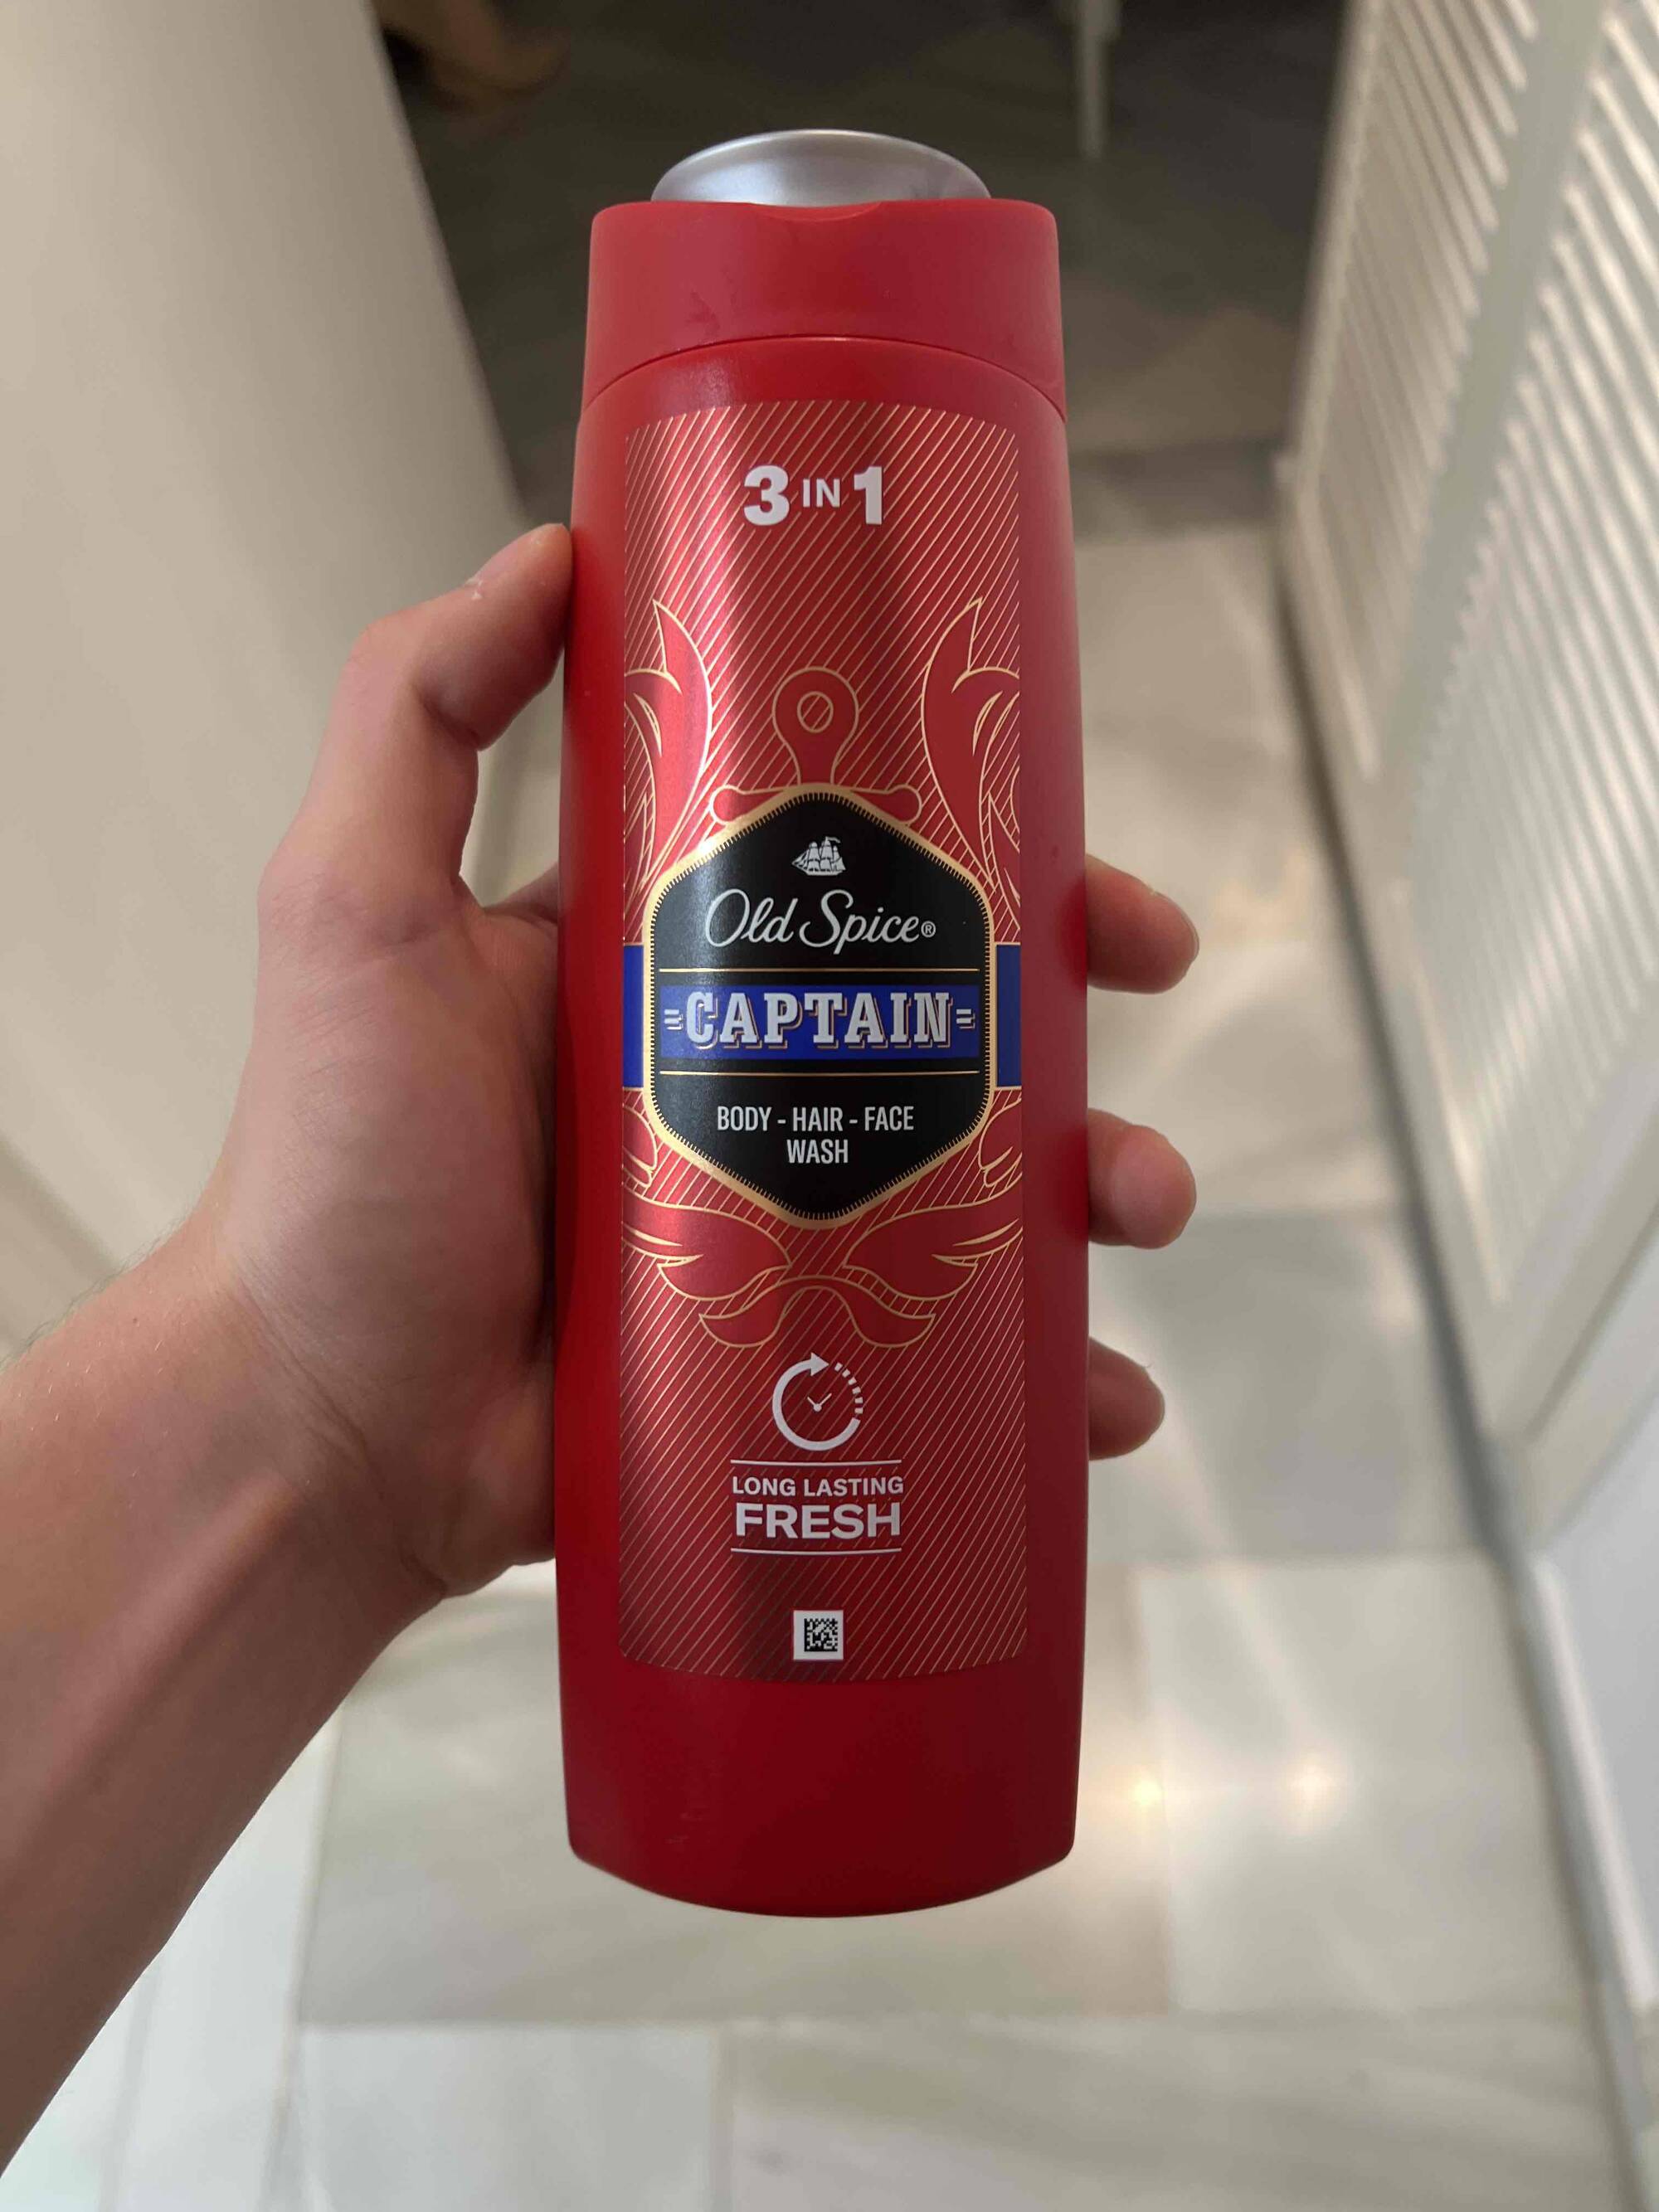 OLD SPICE - Captain - Body hair face wash 3 in 1